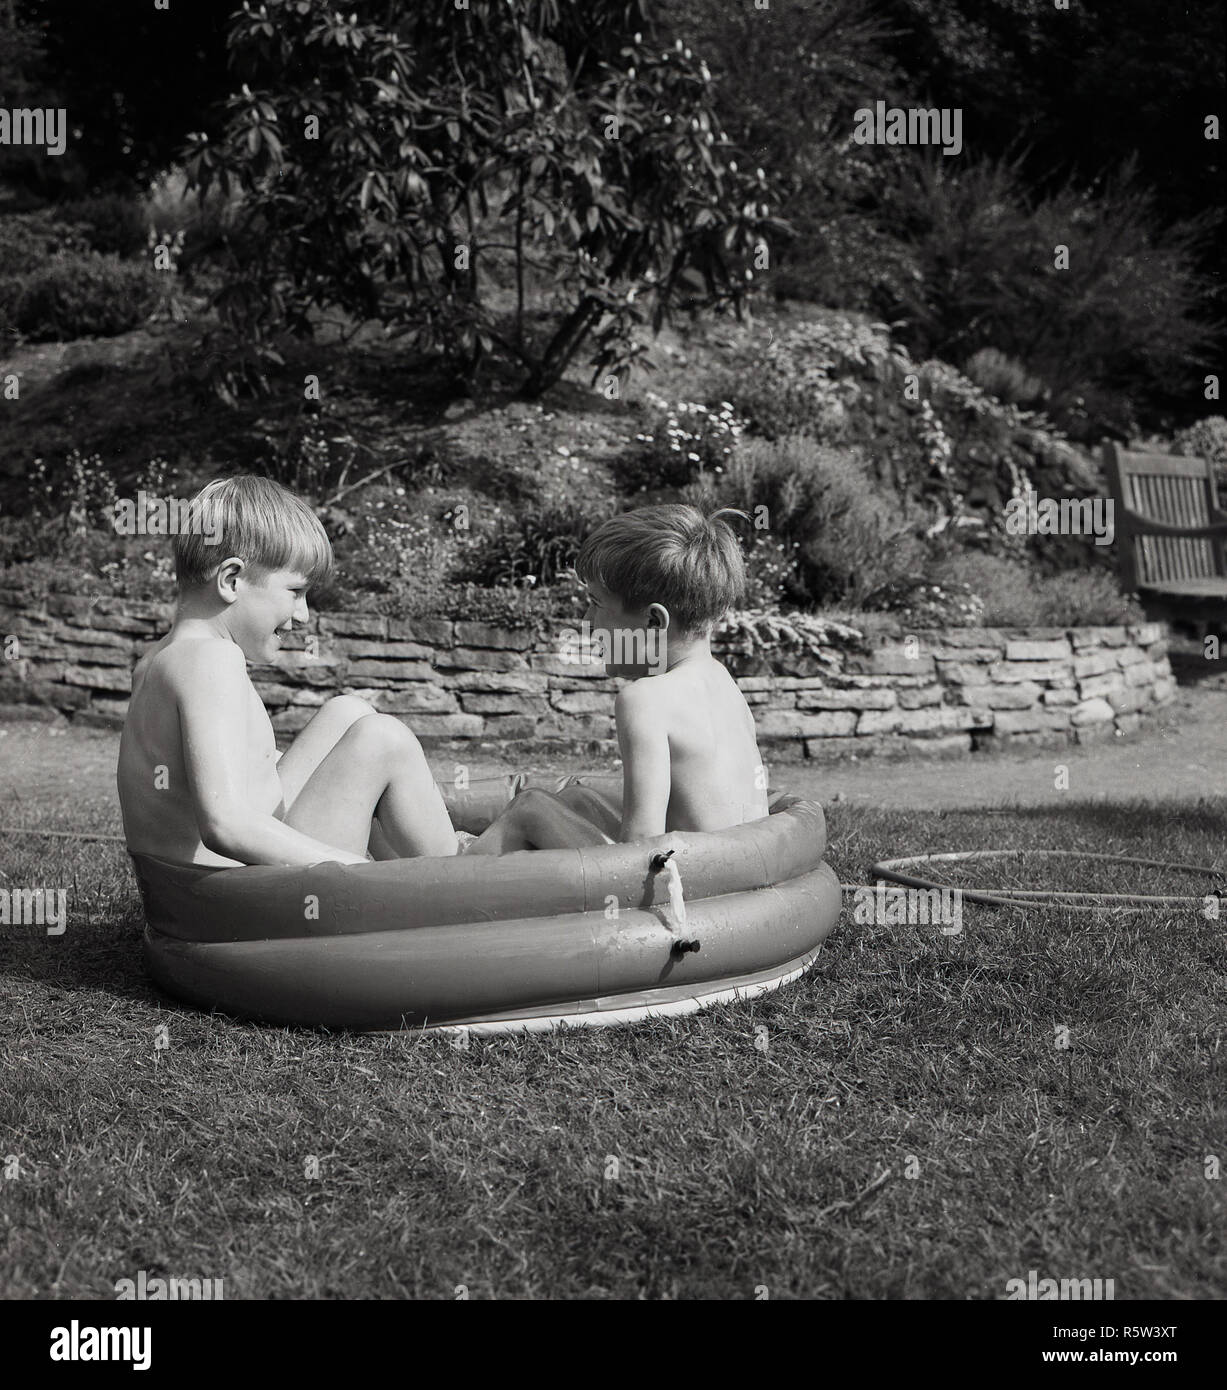 1960s, historical, outside in a garden, two little boys sitting in a small rubber paddling pool. Stock Photo